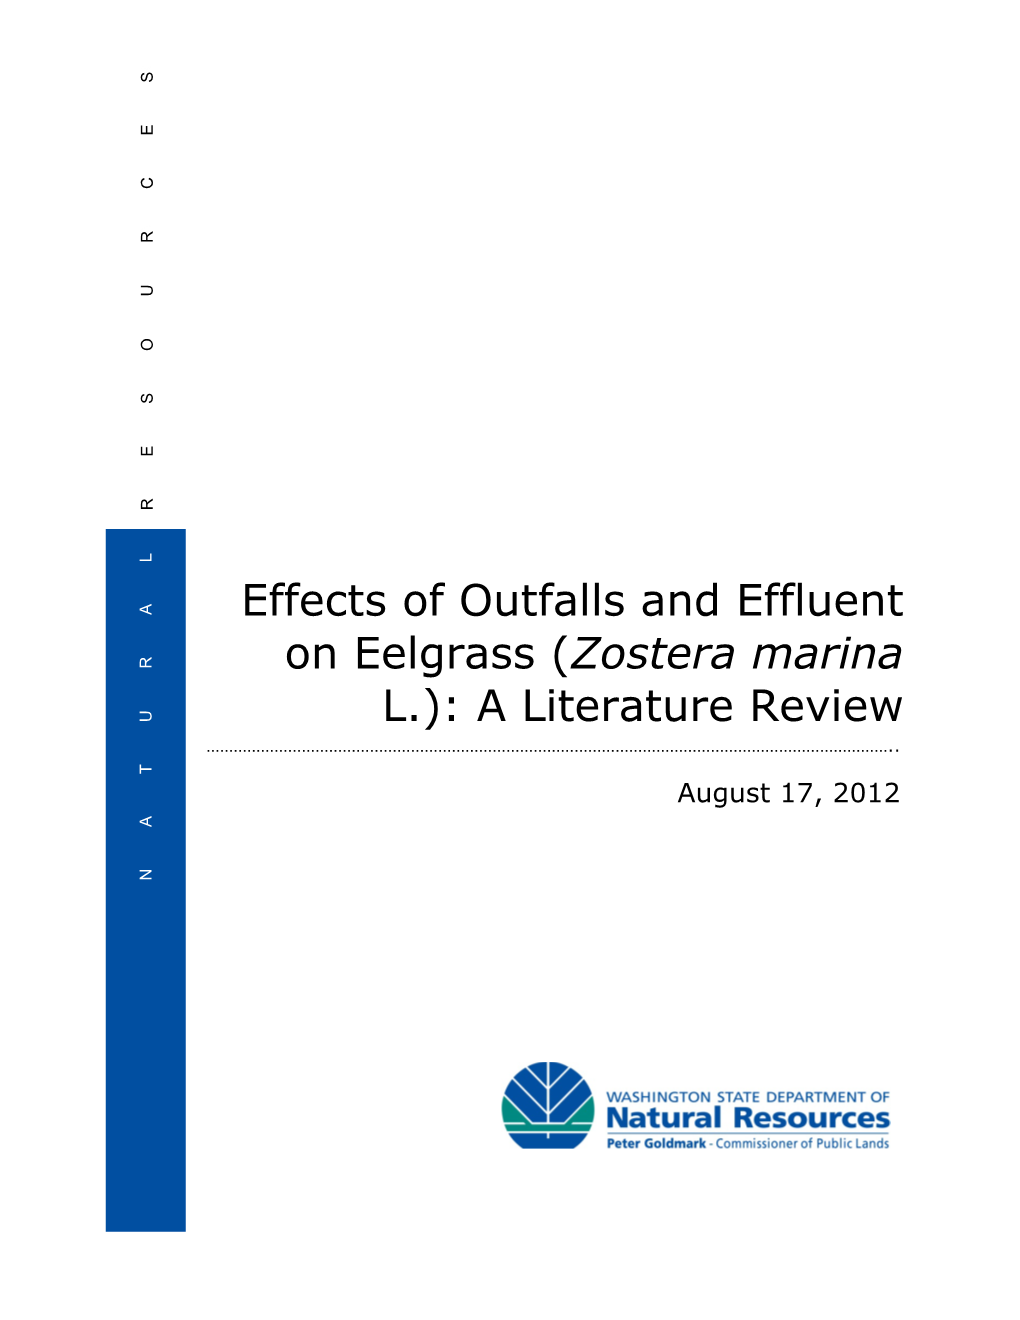 Effects of Outfalls and Effluent on Eelgrass (Zostera Marina L.): a Literature Review ……………………………………………………………………………………………………………………………………